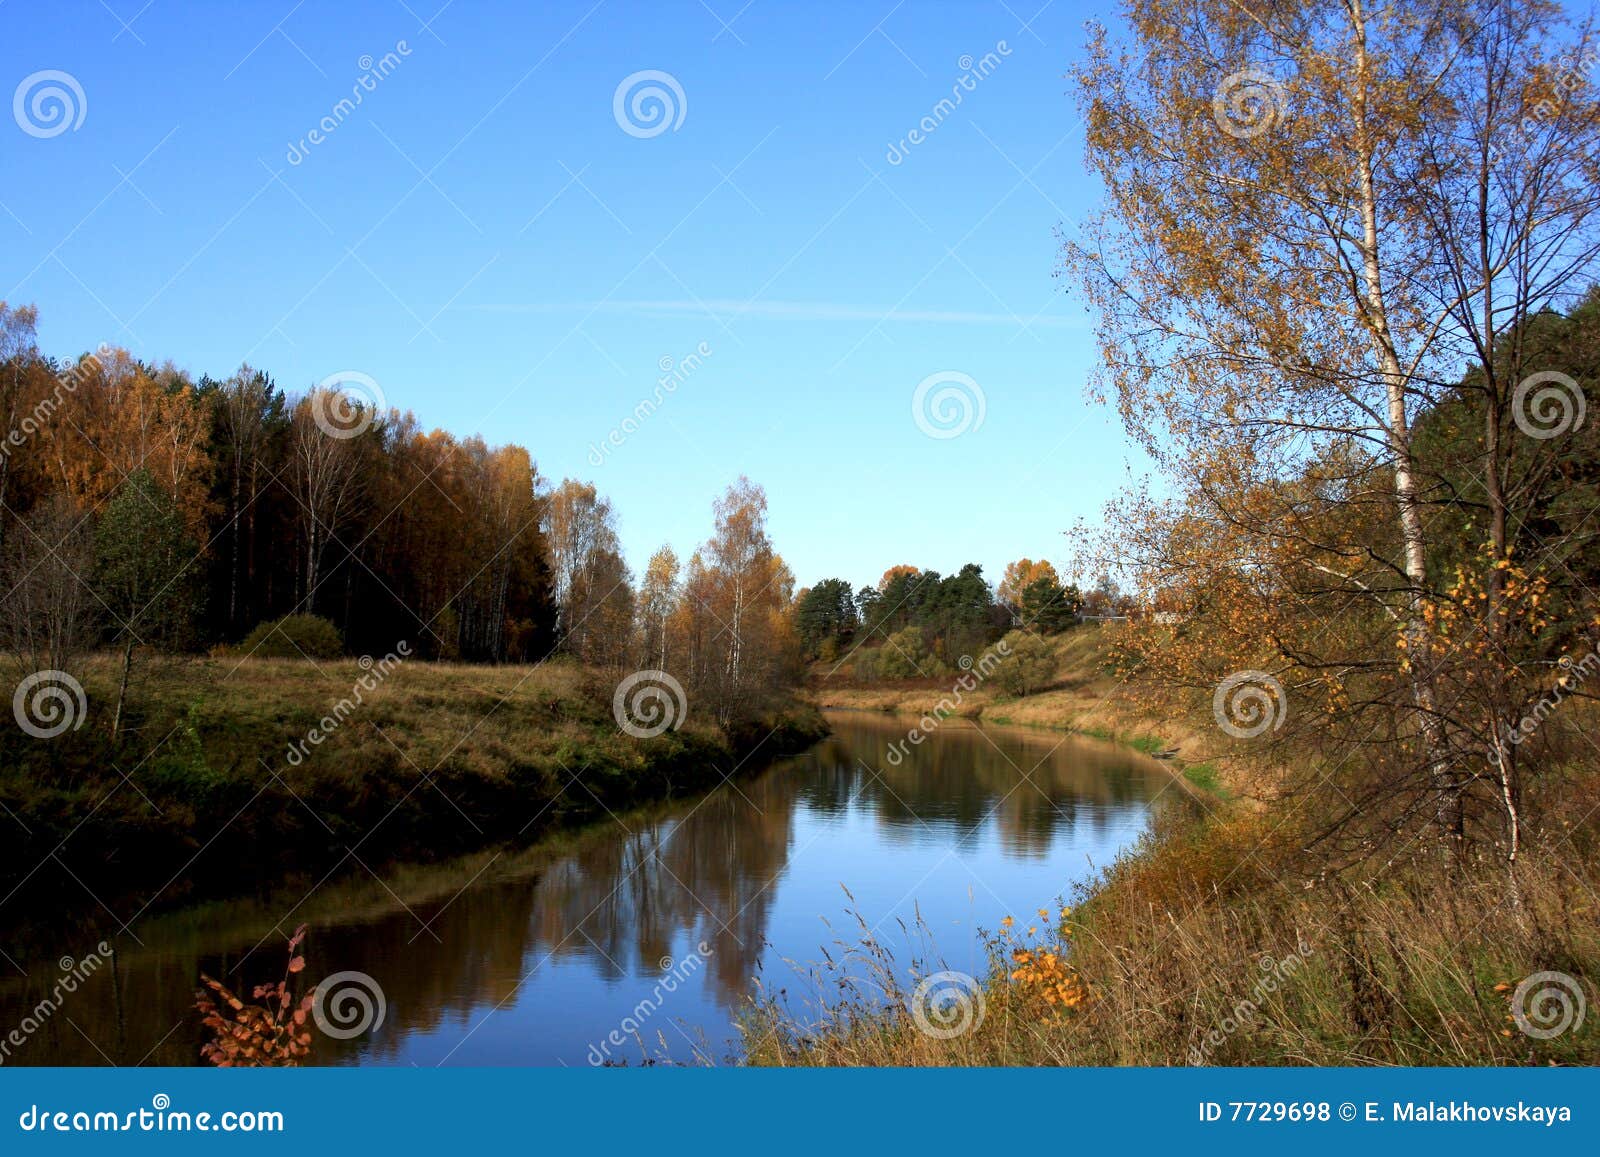 Scenic view of river in colorful autumn scene, forest in background.